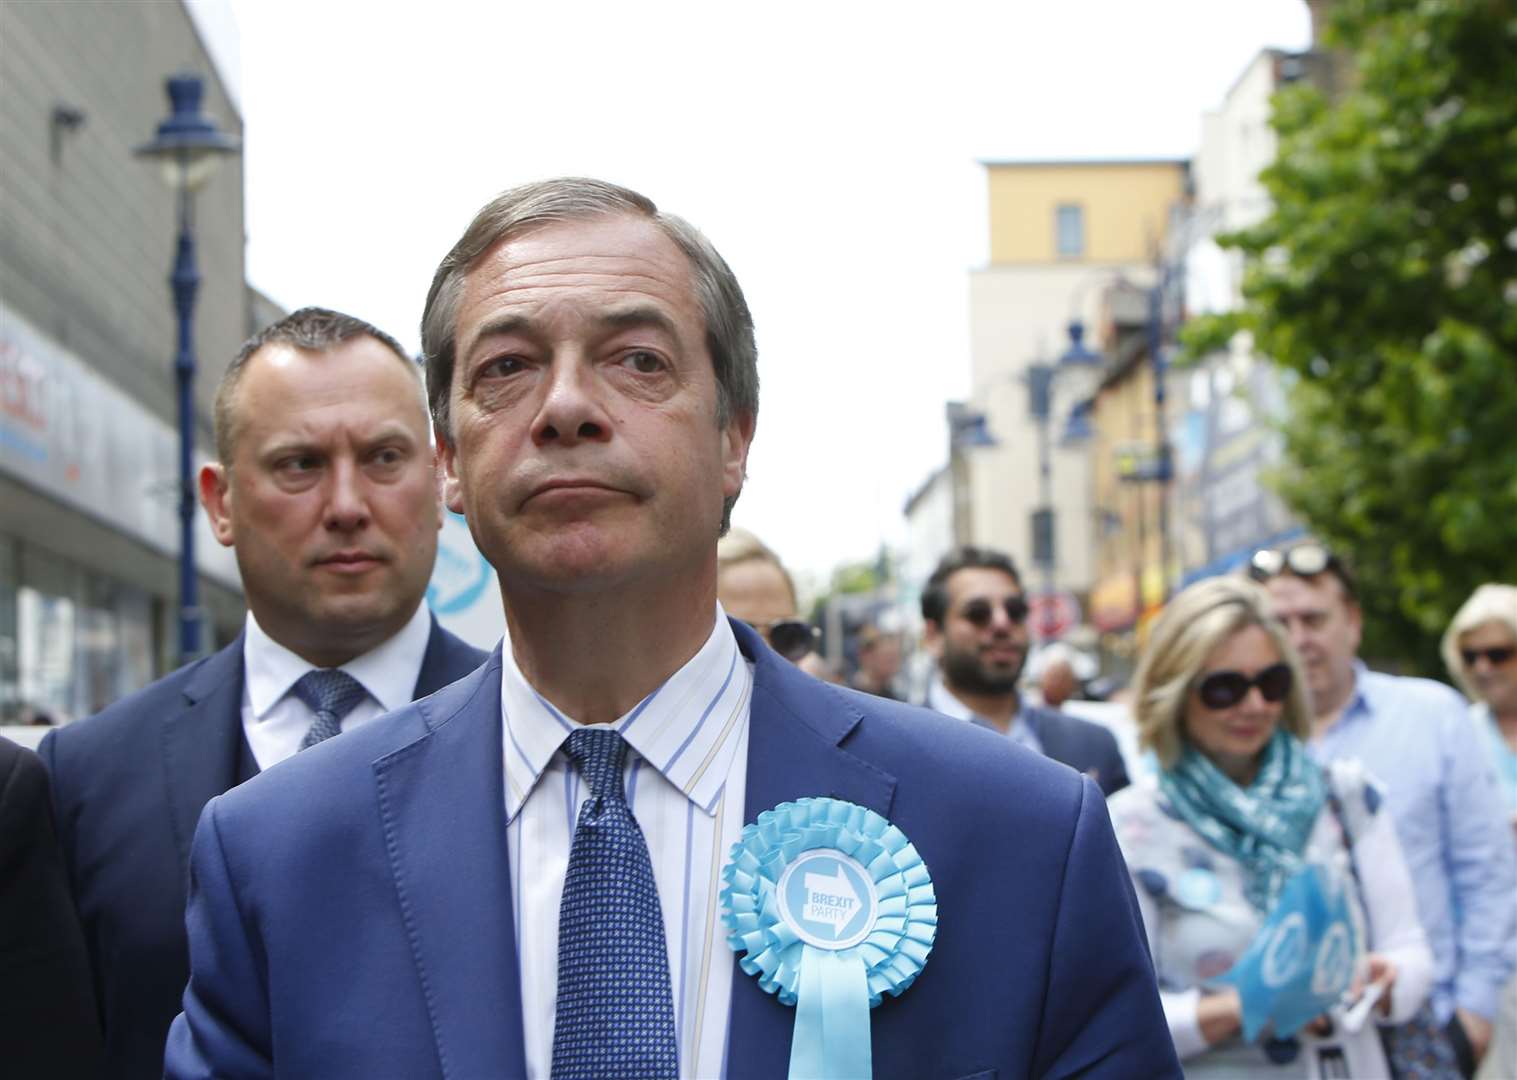 Mr Farage visits Gravesend ahead of the European elections in 2019. Picture: Andy Jones